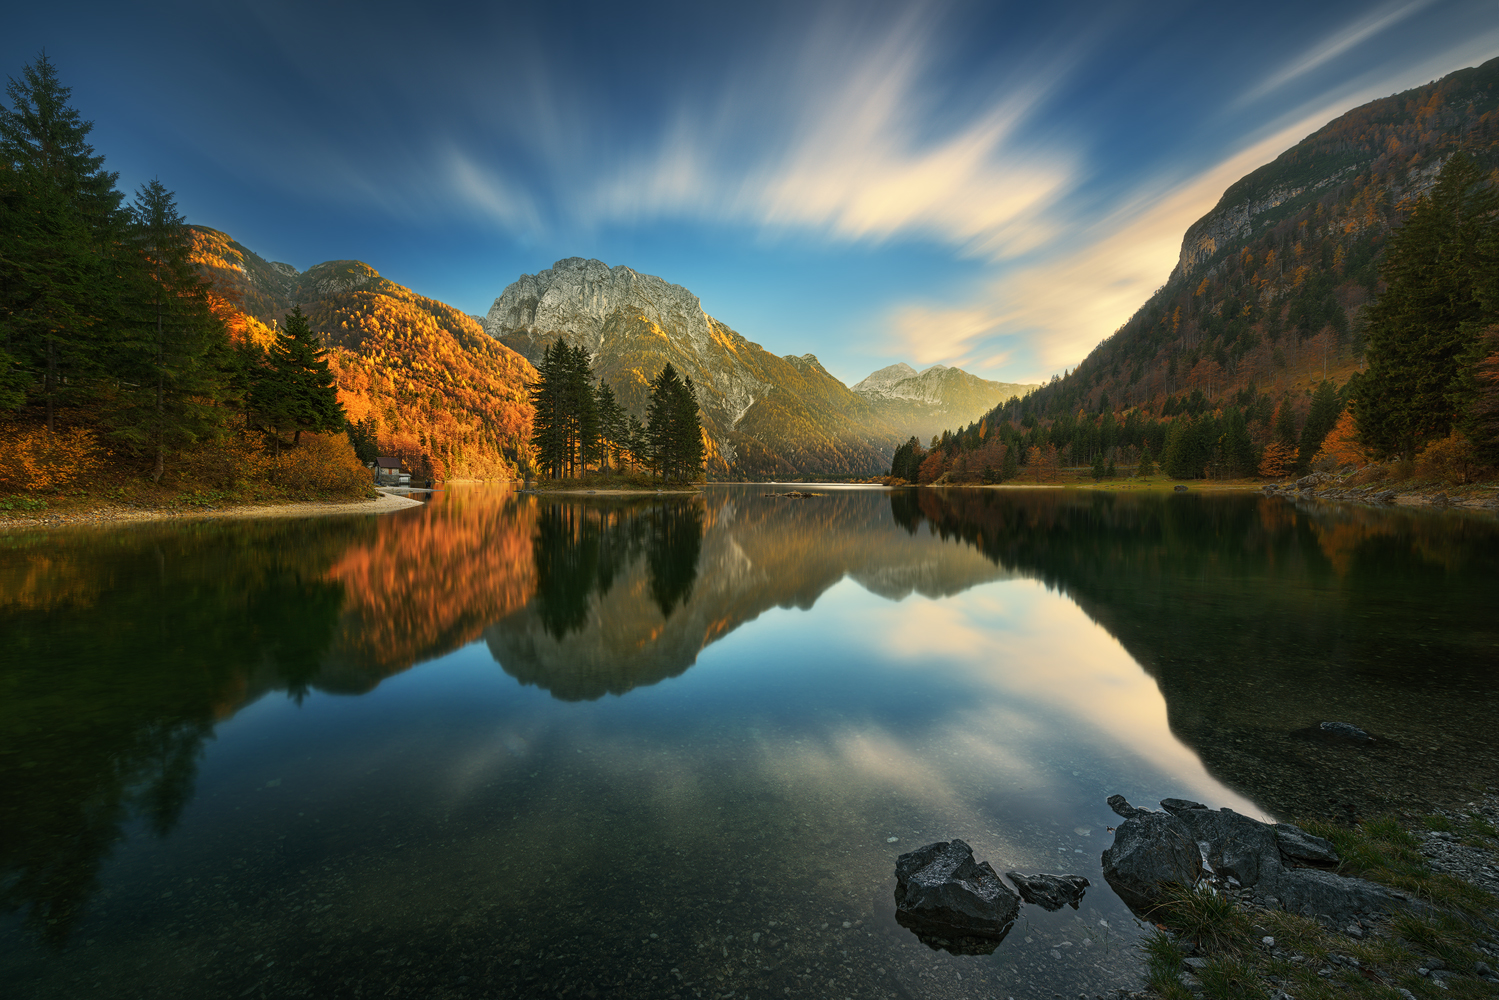 Landscape Nature Mountains Trees Forest Lake Mirrored Reflection Sky Clouds Horizon Rocks House Krzy 1499x1000